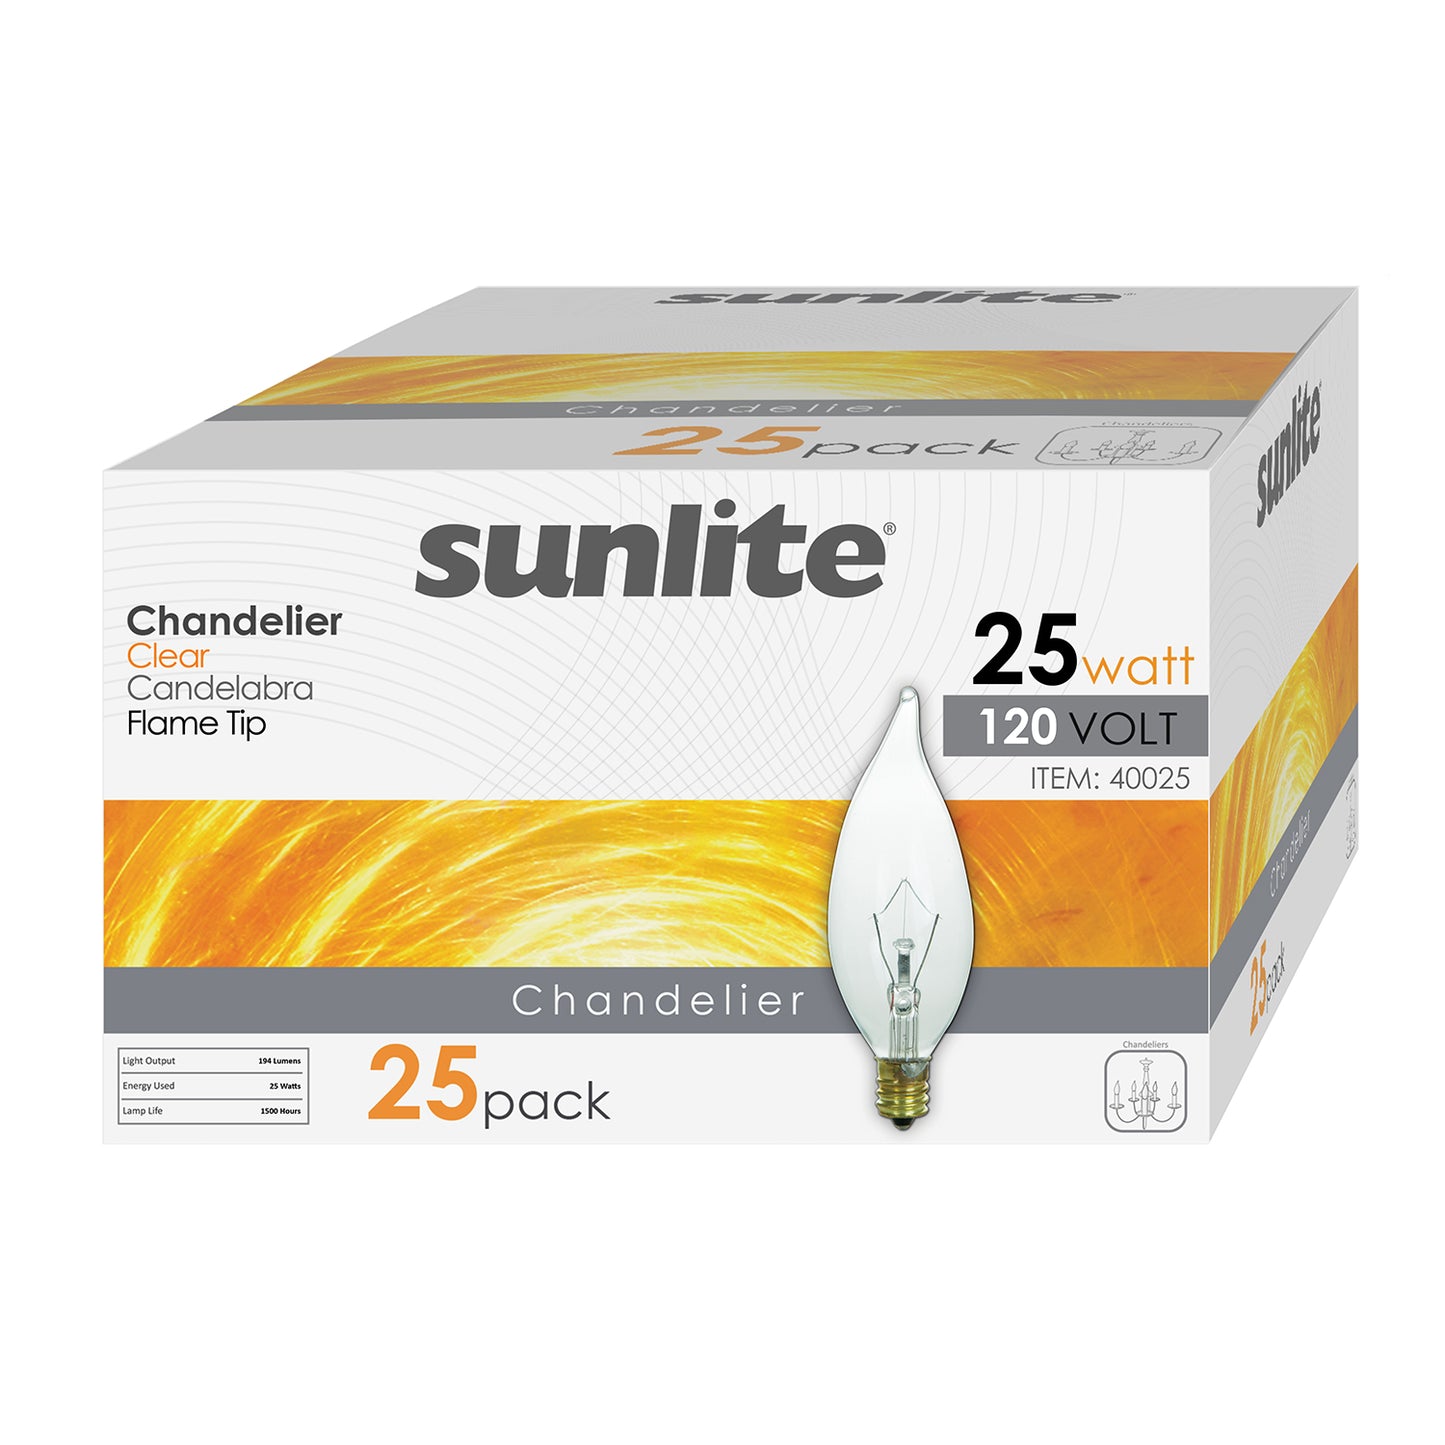 Sunlite 40025-SU 25-Pack Flame Tip Chandelier Bulbs, 25 Watts, Candelabra Base (E12), 120 Volt, Clear, Incandescent, Dimmable, 32K - Warm White